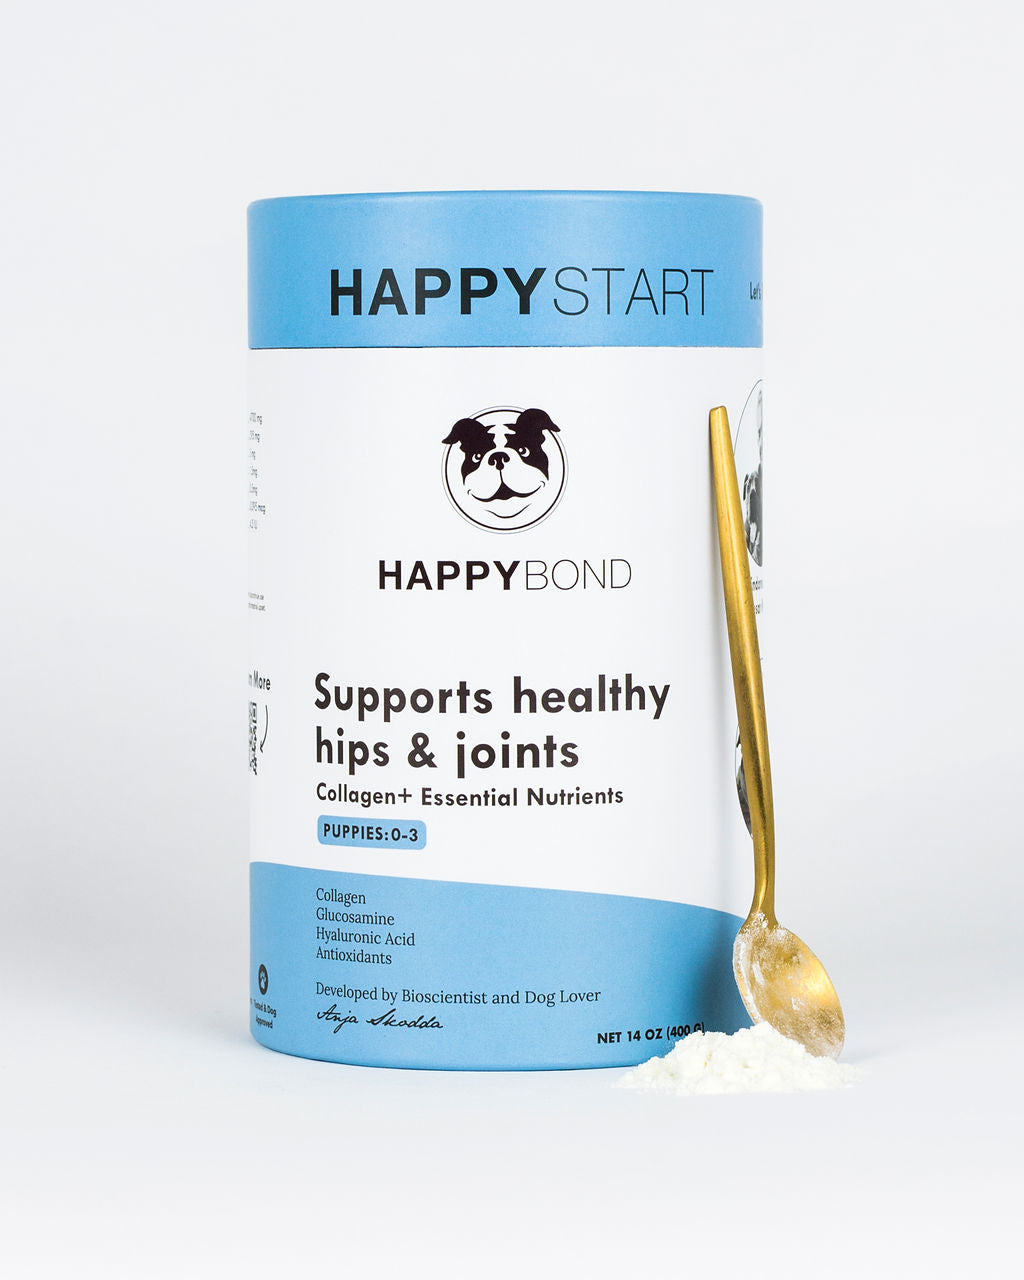 Collagen Hip & Joint Support for Puppies - Blue container with spoon and white powder for nourishing puppy's joint health.